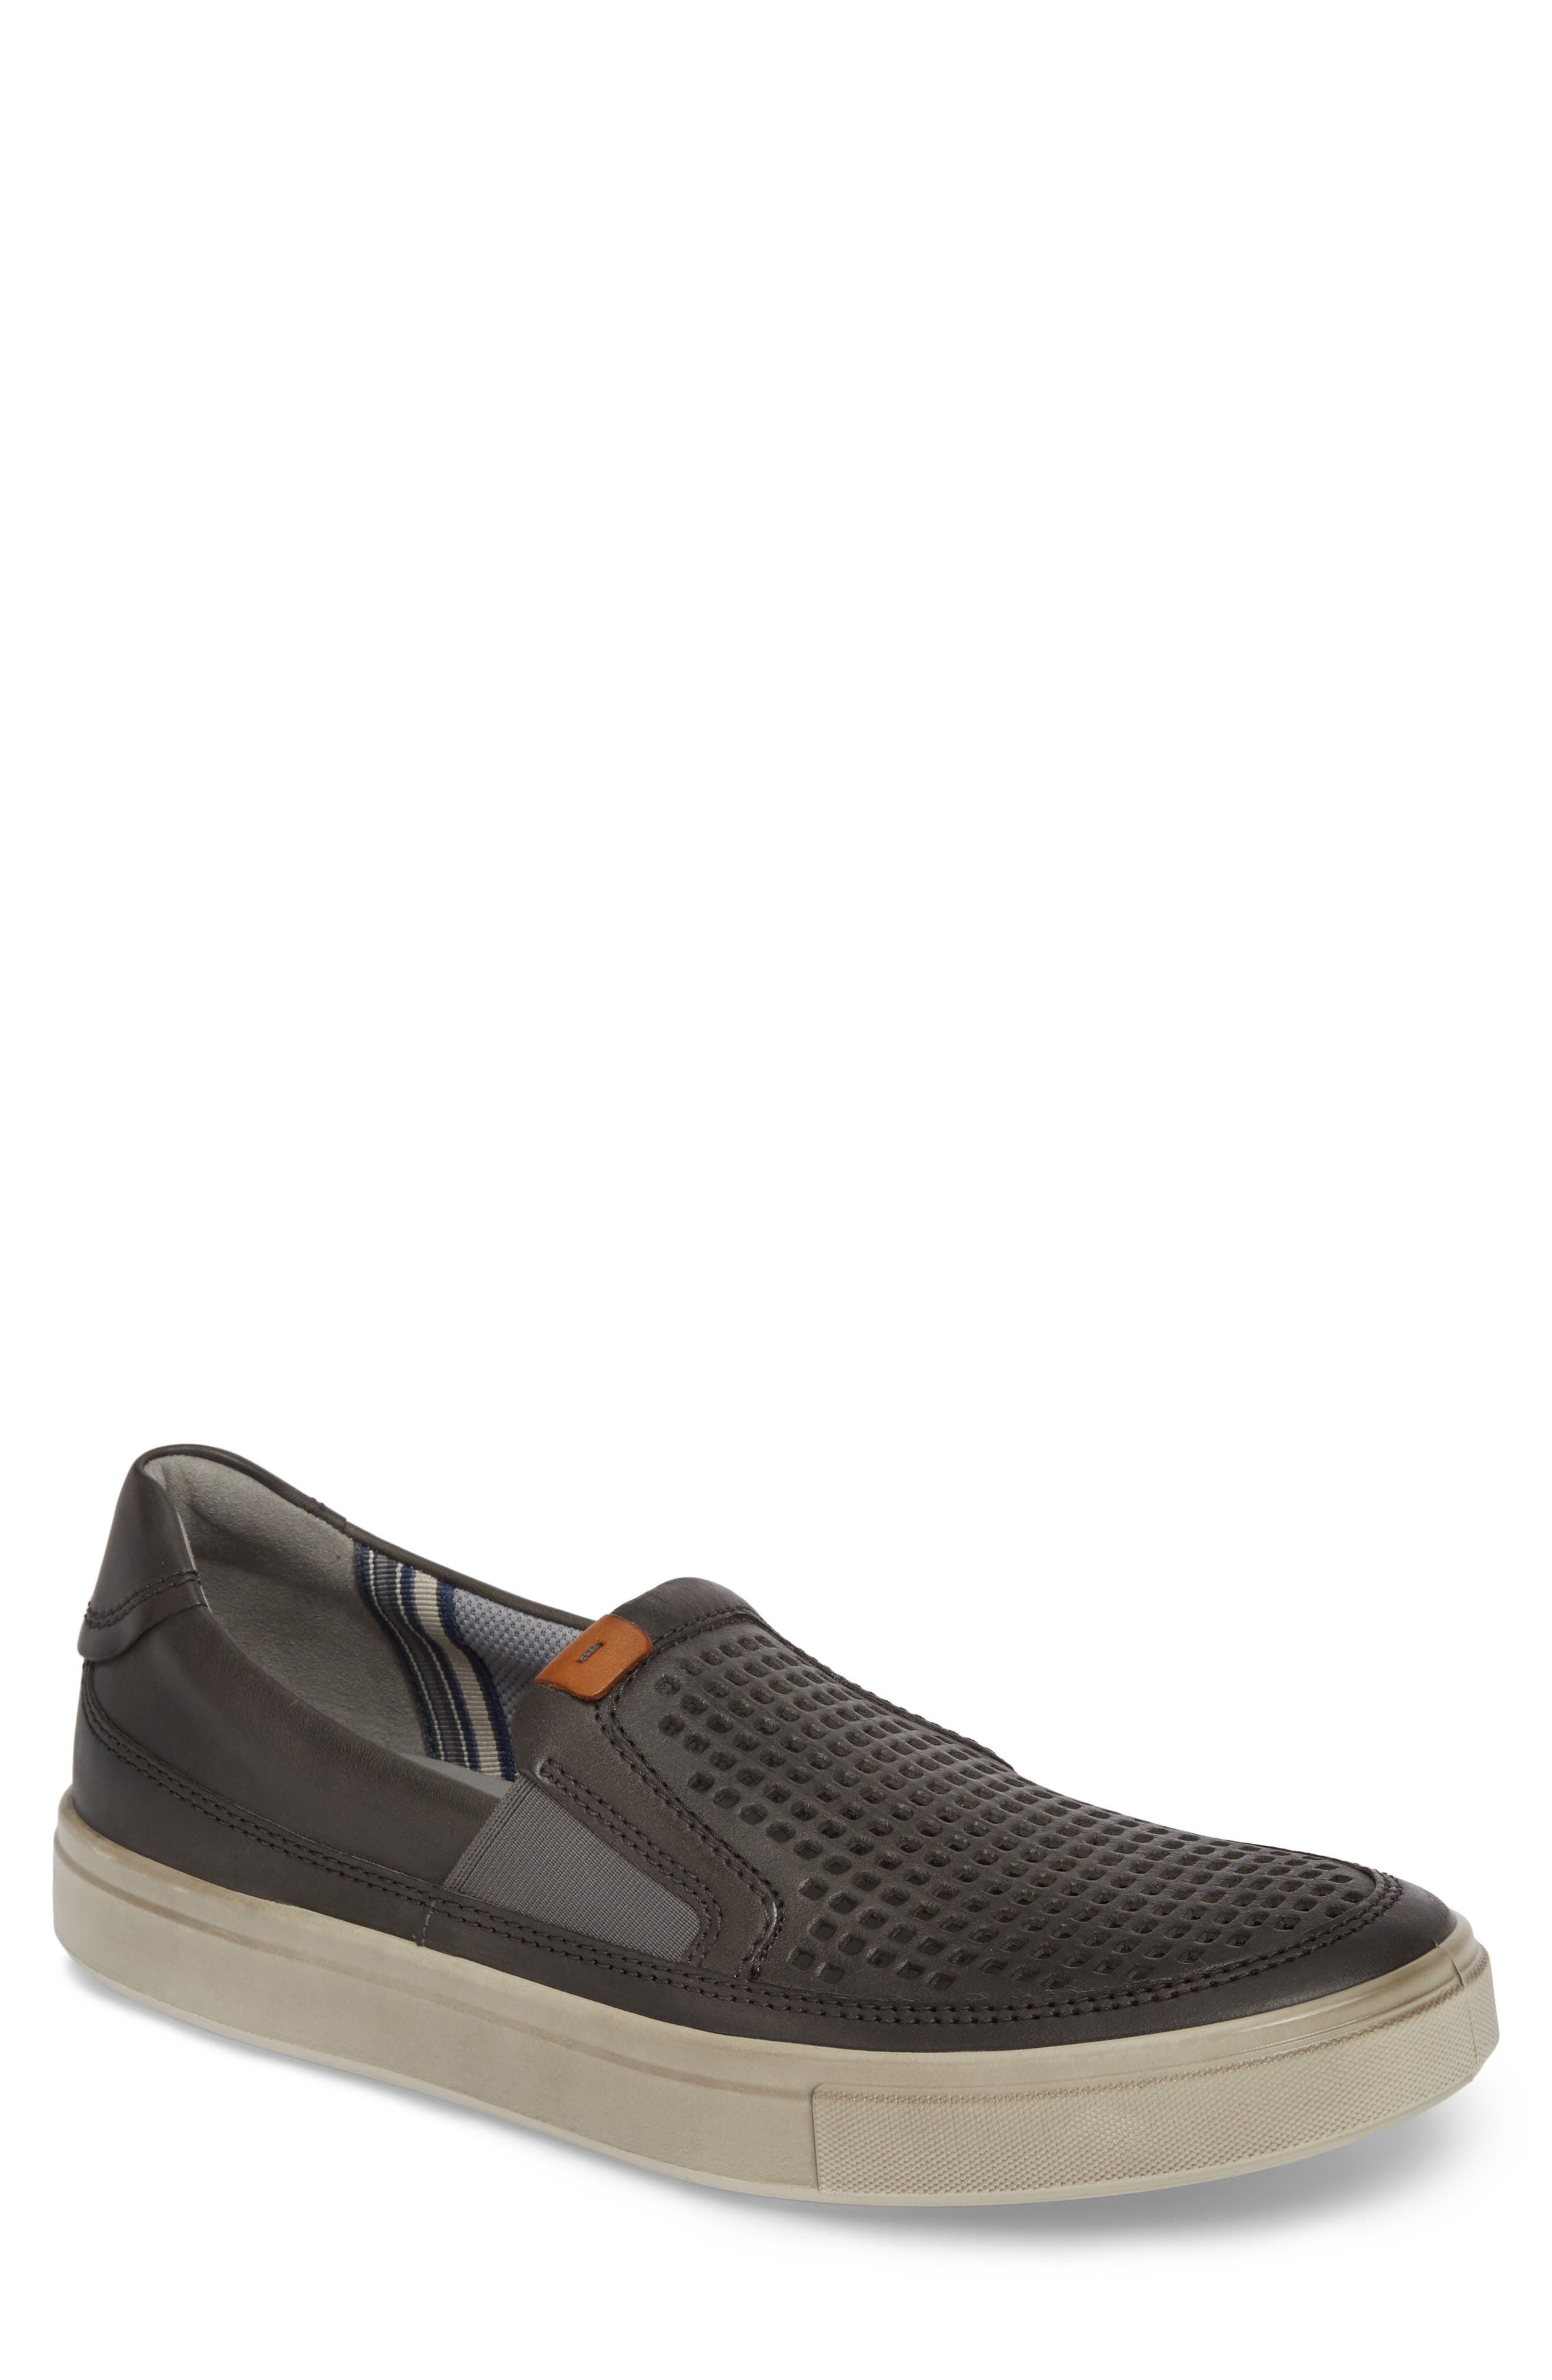 ECCO | Kyle Perforated Slip-On Sneaker 